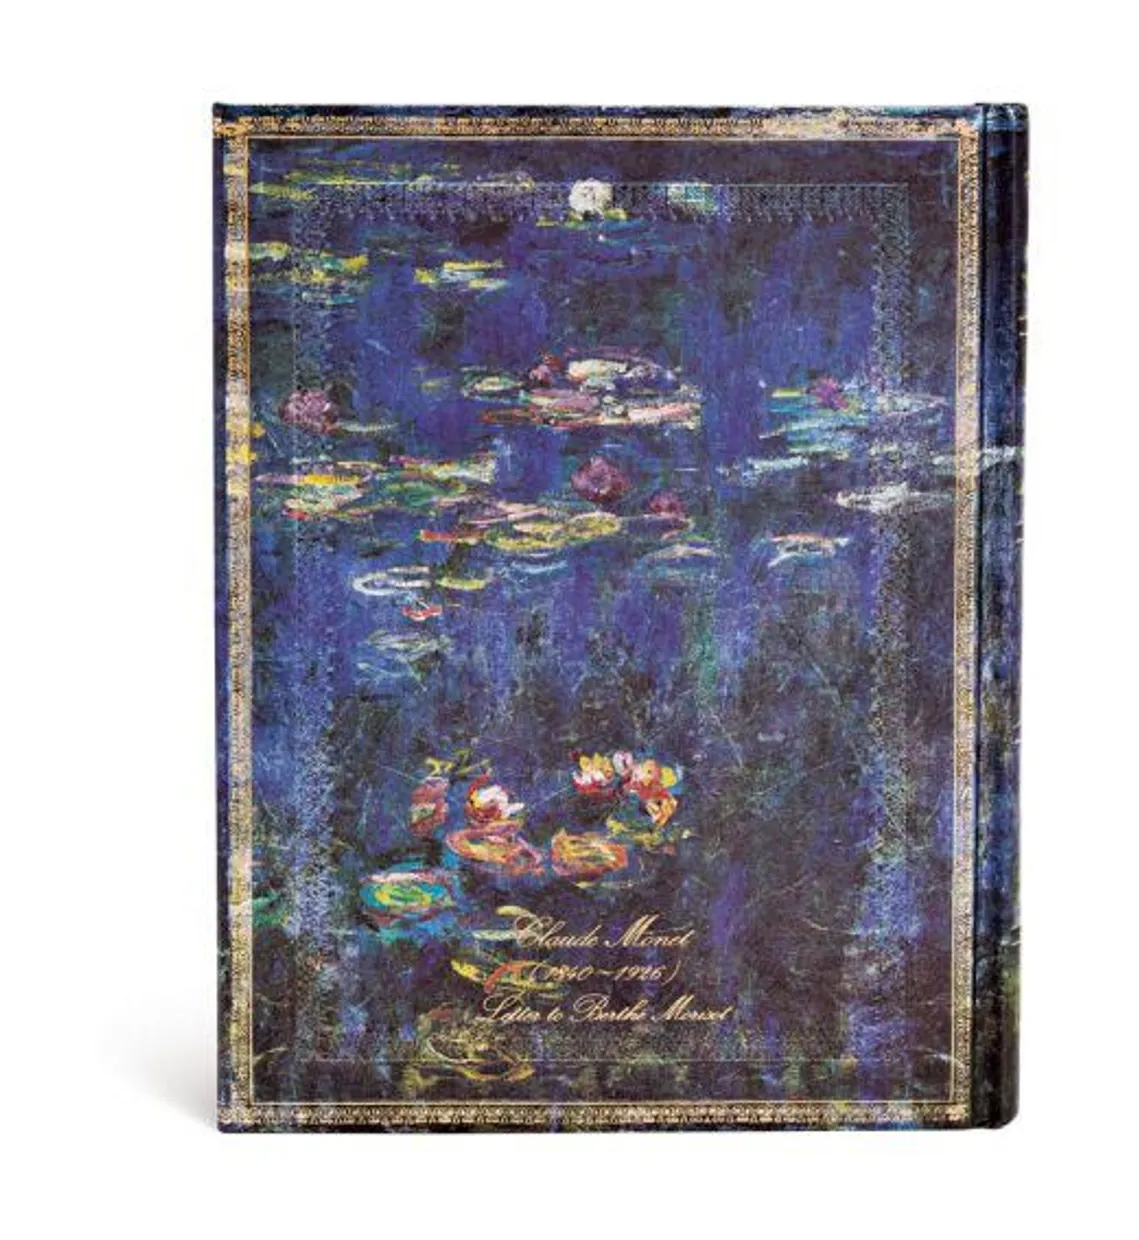 Monet (water Lilies), Letter to Marisot